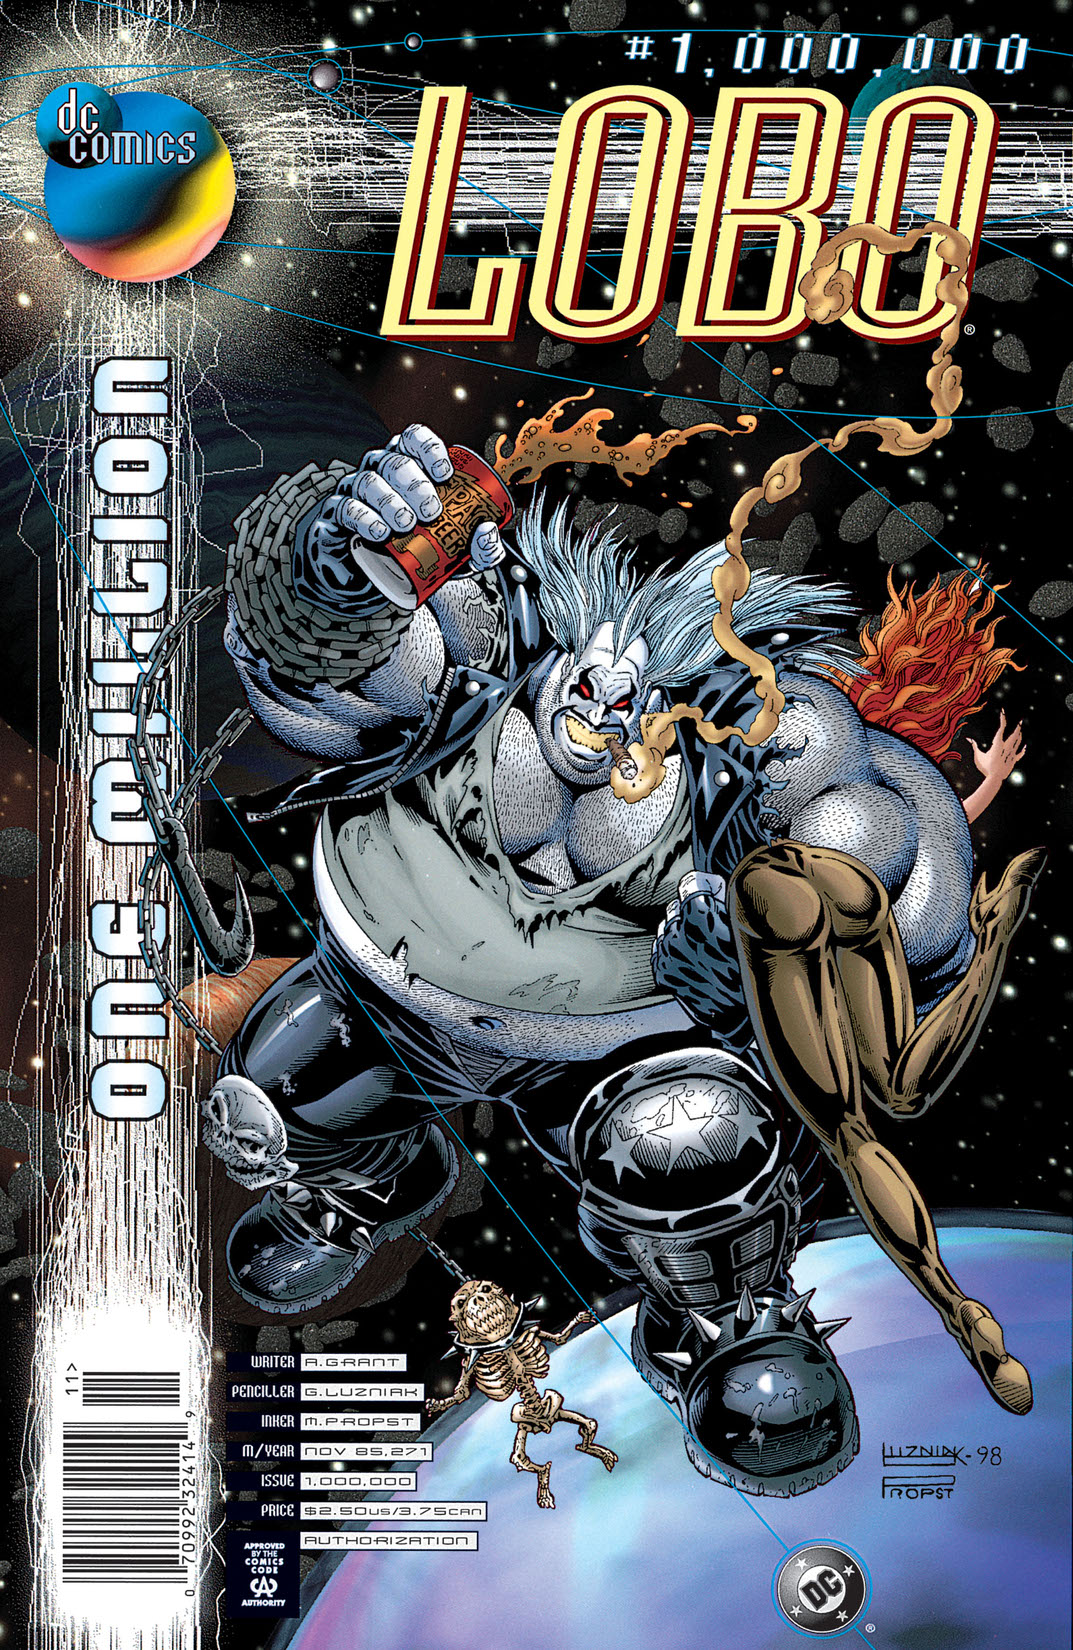 Lobo #1000000 preview images